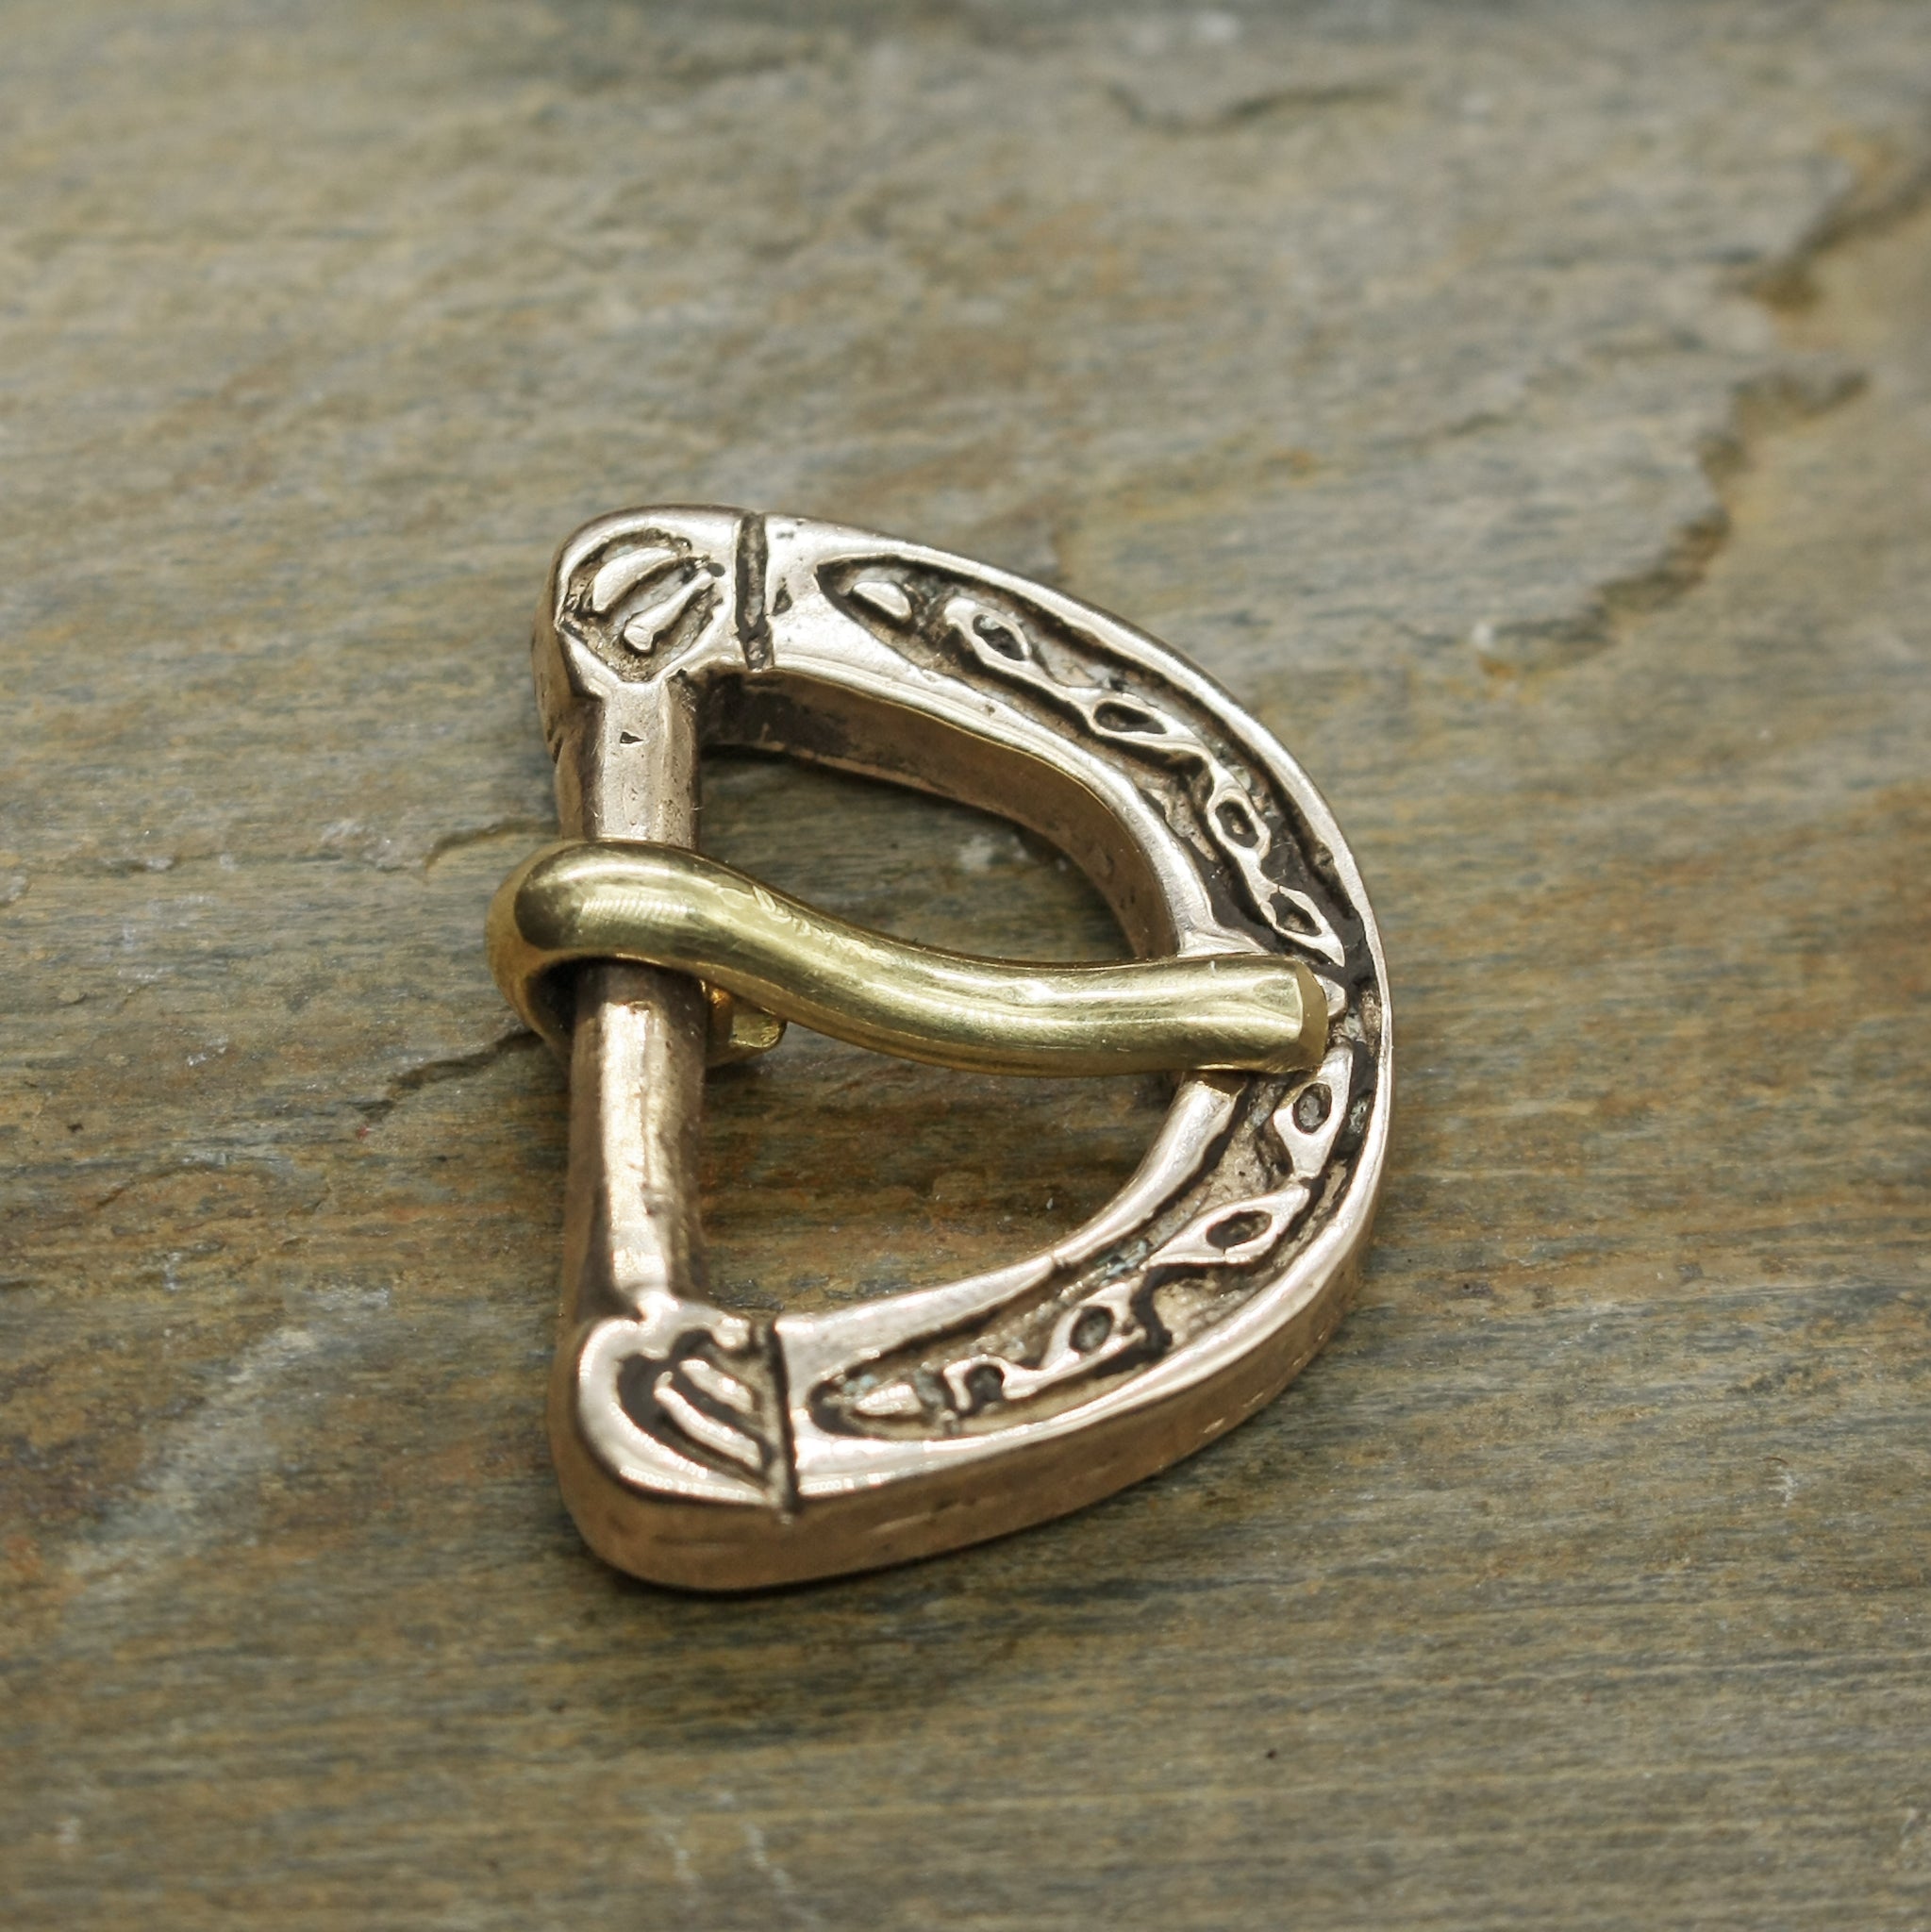 Replica Hiberno-Norse Vking Belt Buckle in Solid Bronze on Rock